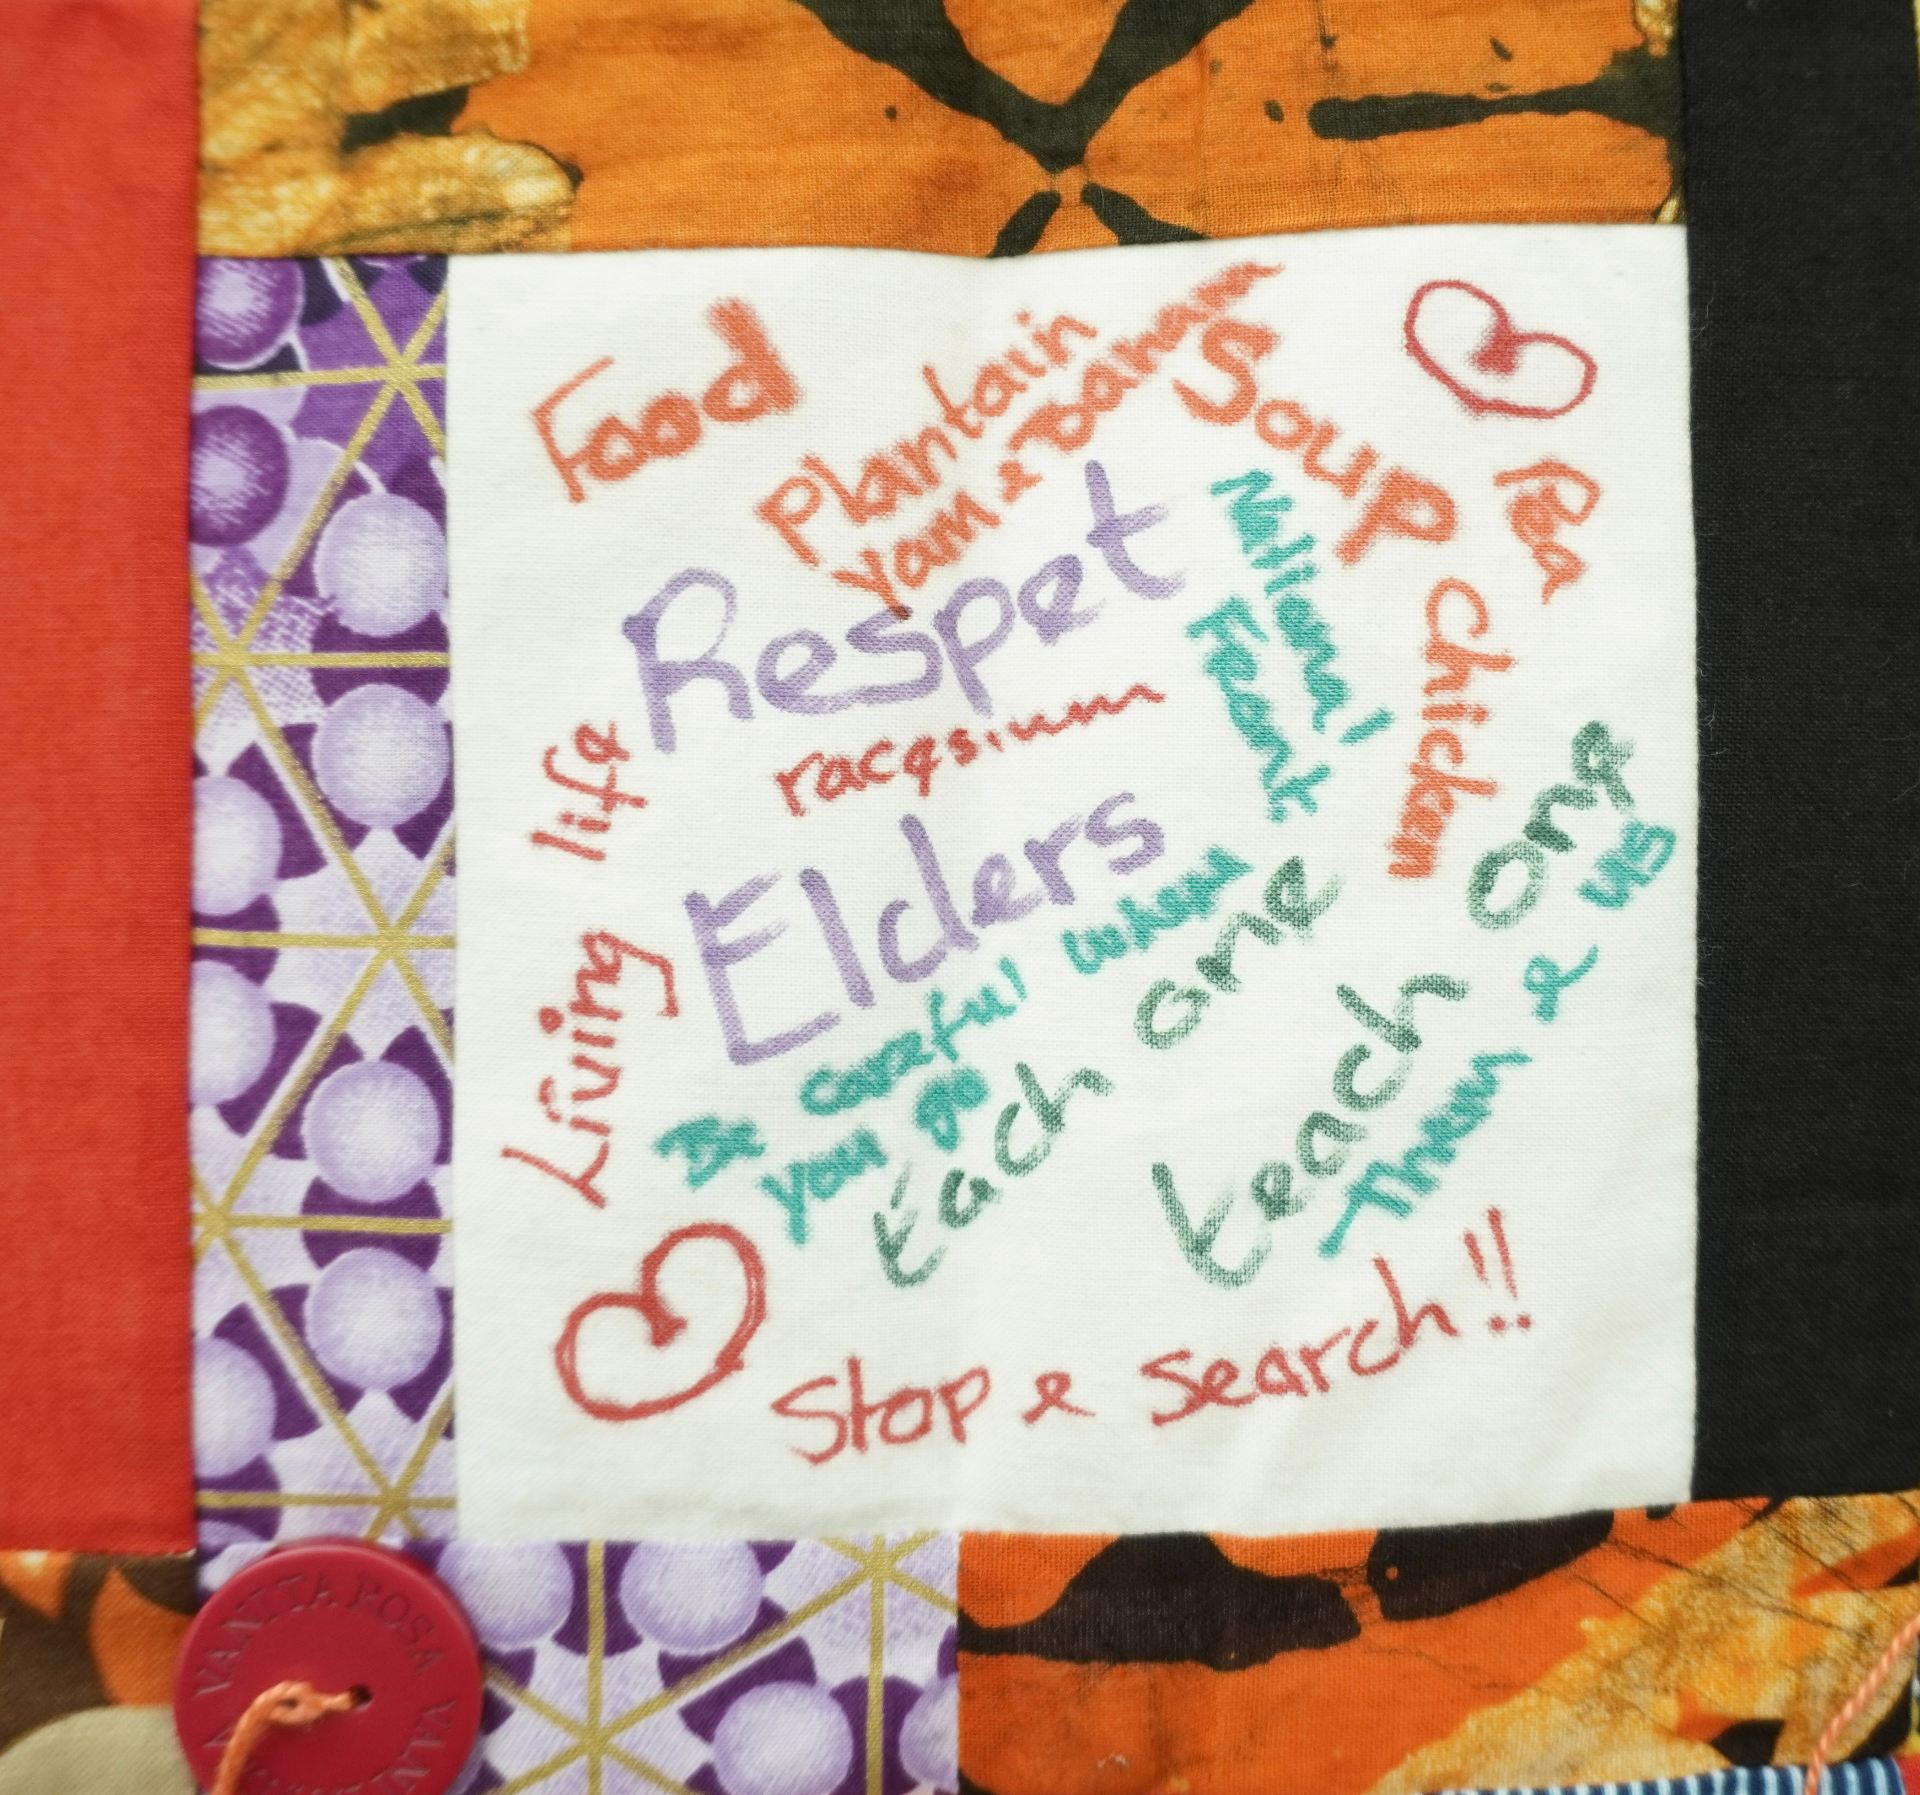 Commemorative quilt. Text reads, 'Food, plantain, respect, elders, stop and search, each one teach one, living life, yam and banana, national front, racism'